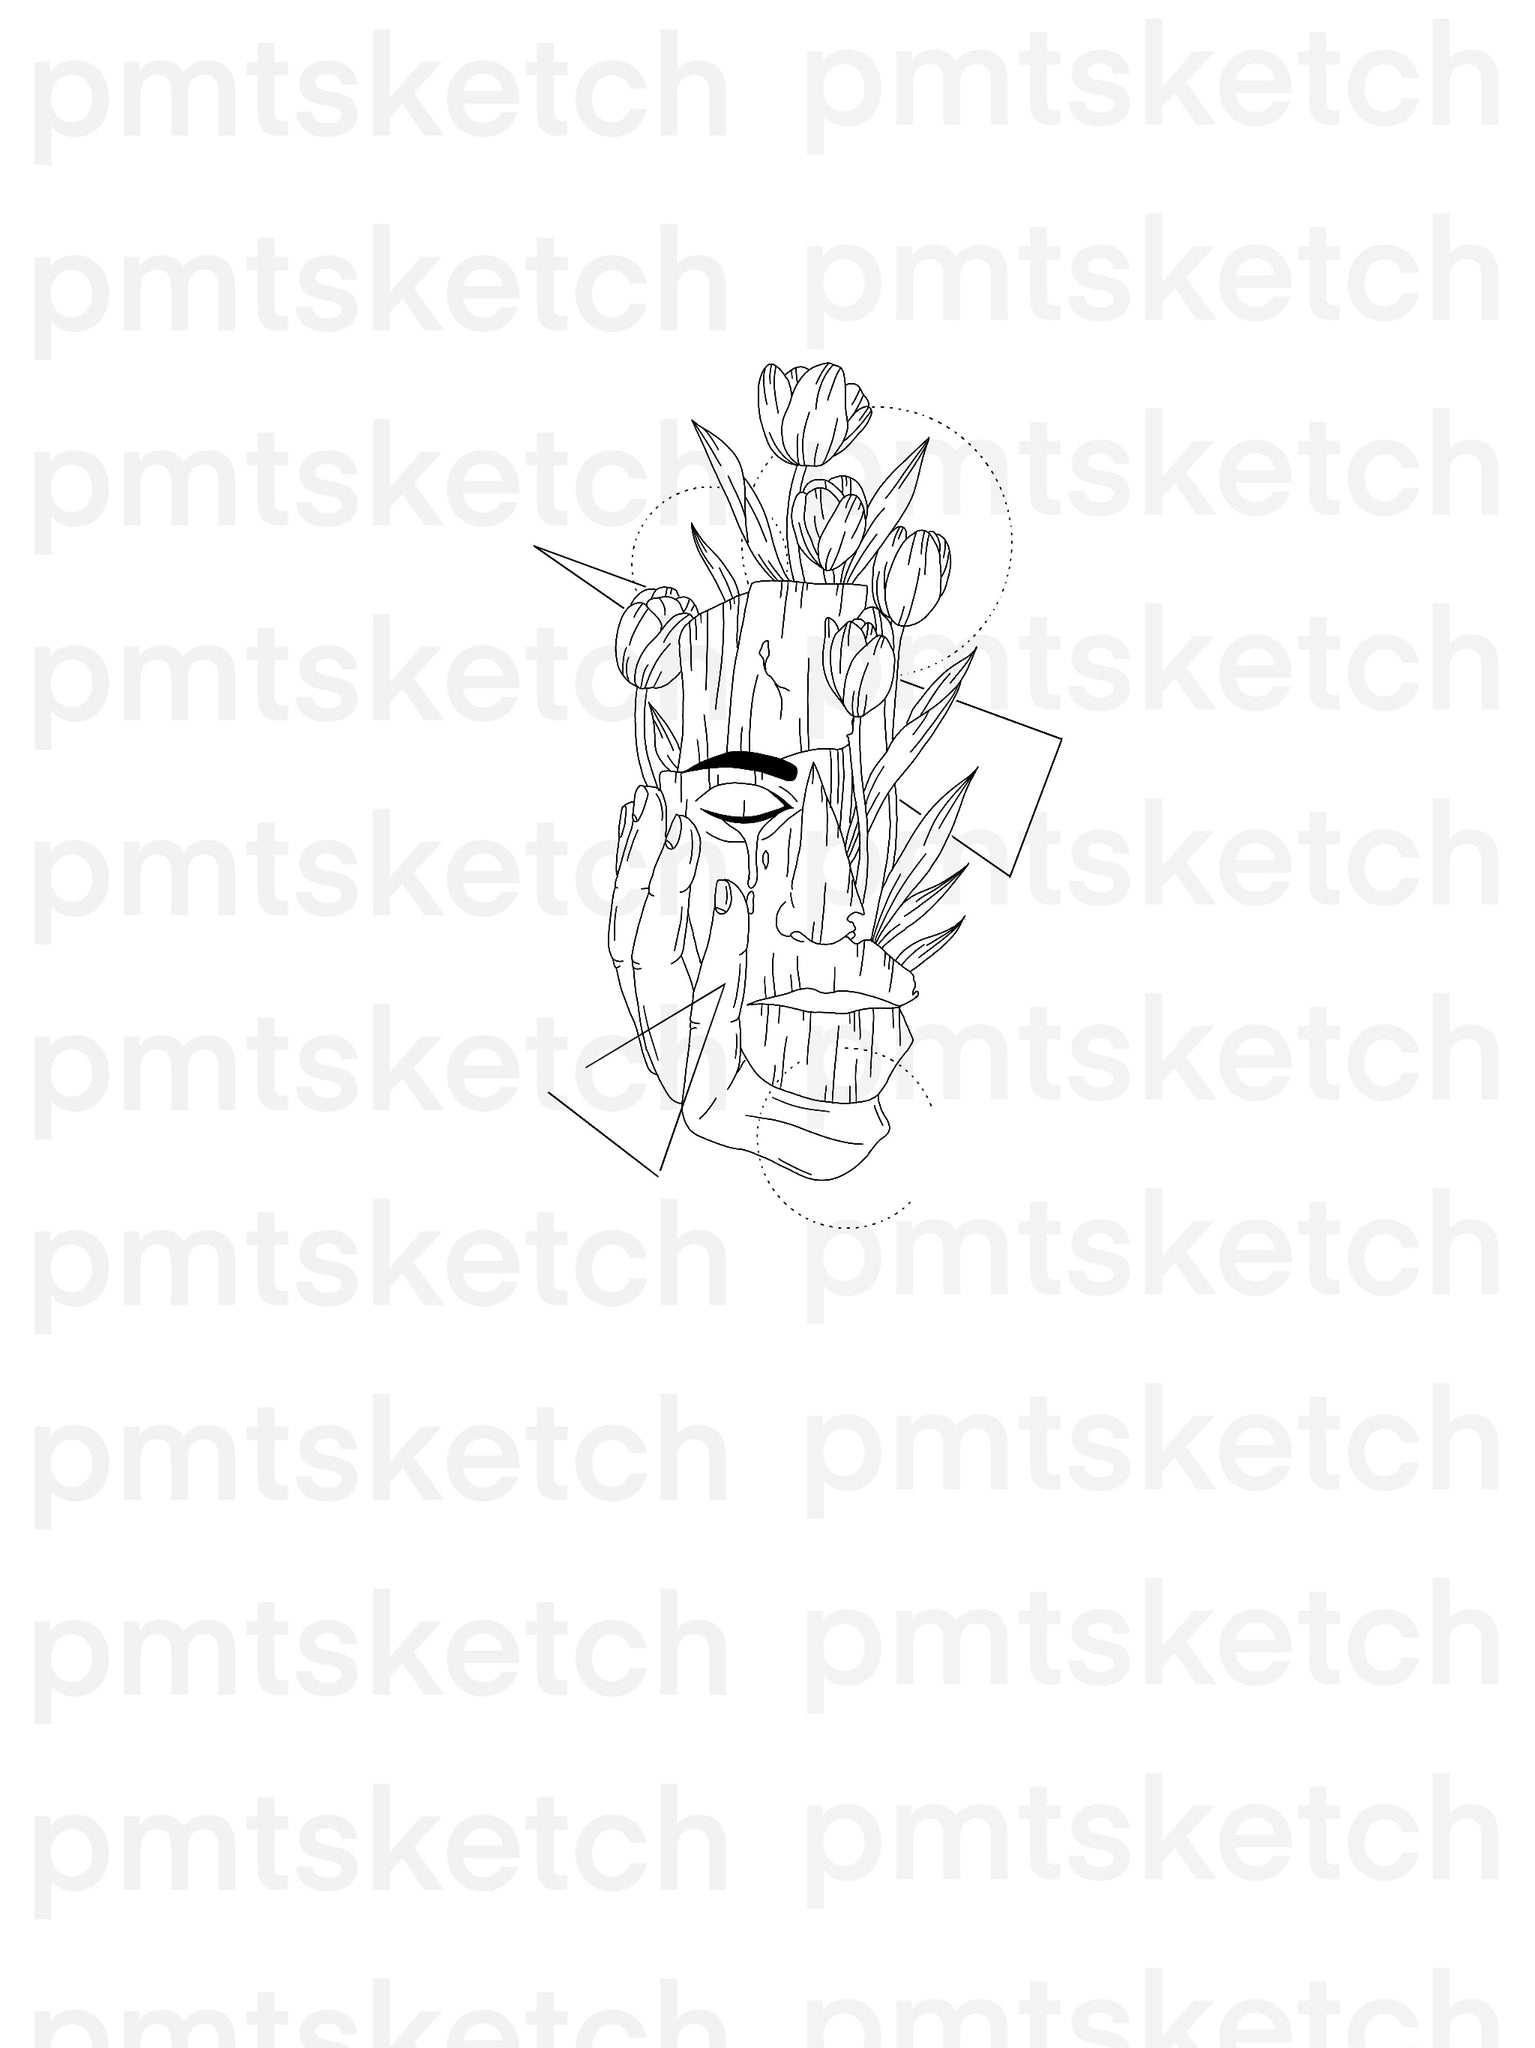 Abstract Wooden Face / Hand / Flowers